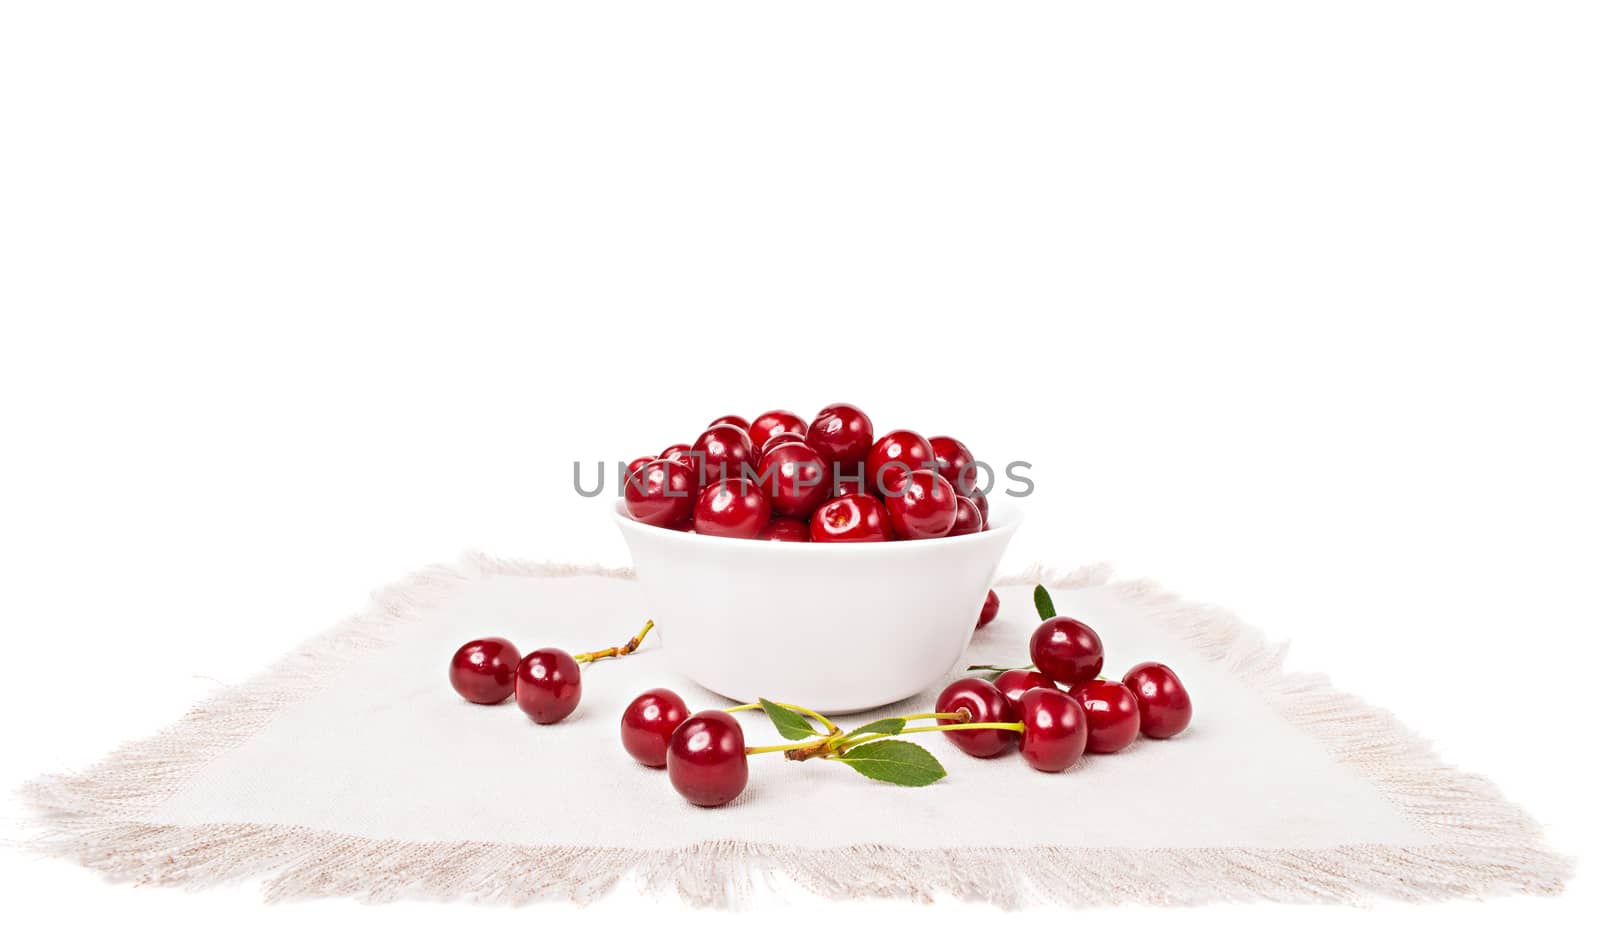 Sweet juicy cherries in a bowl on the napkin by Draw05